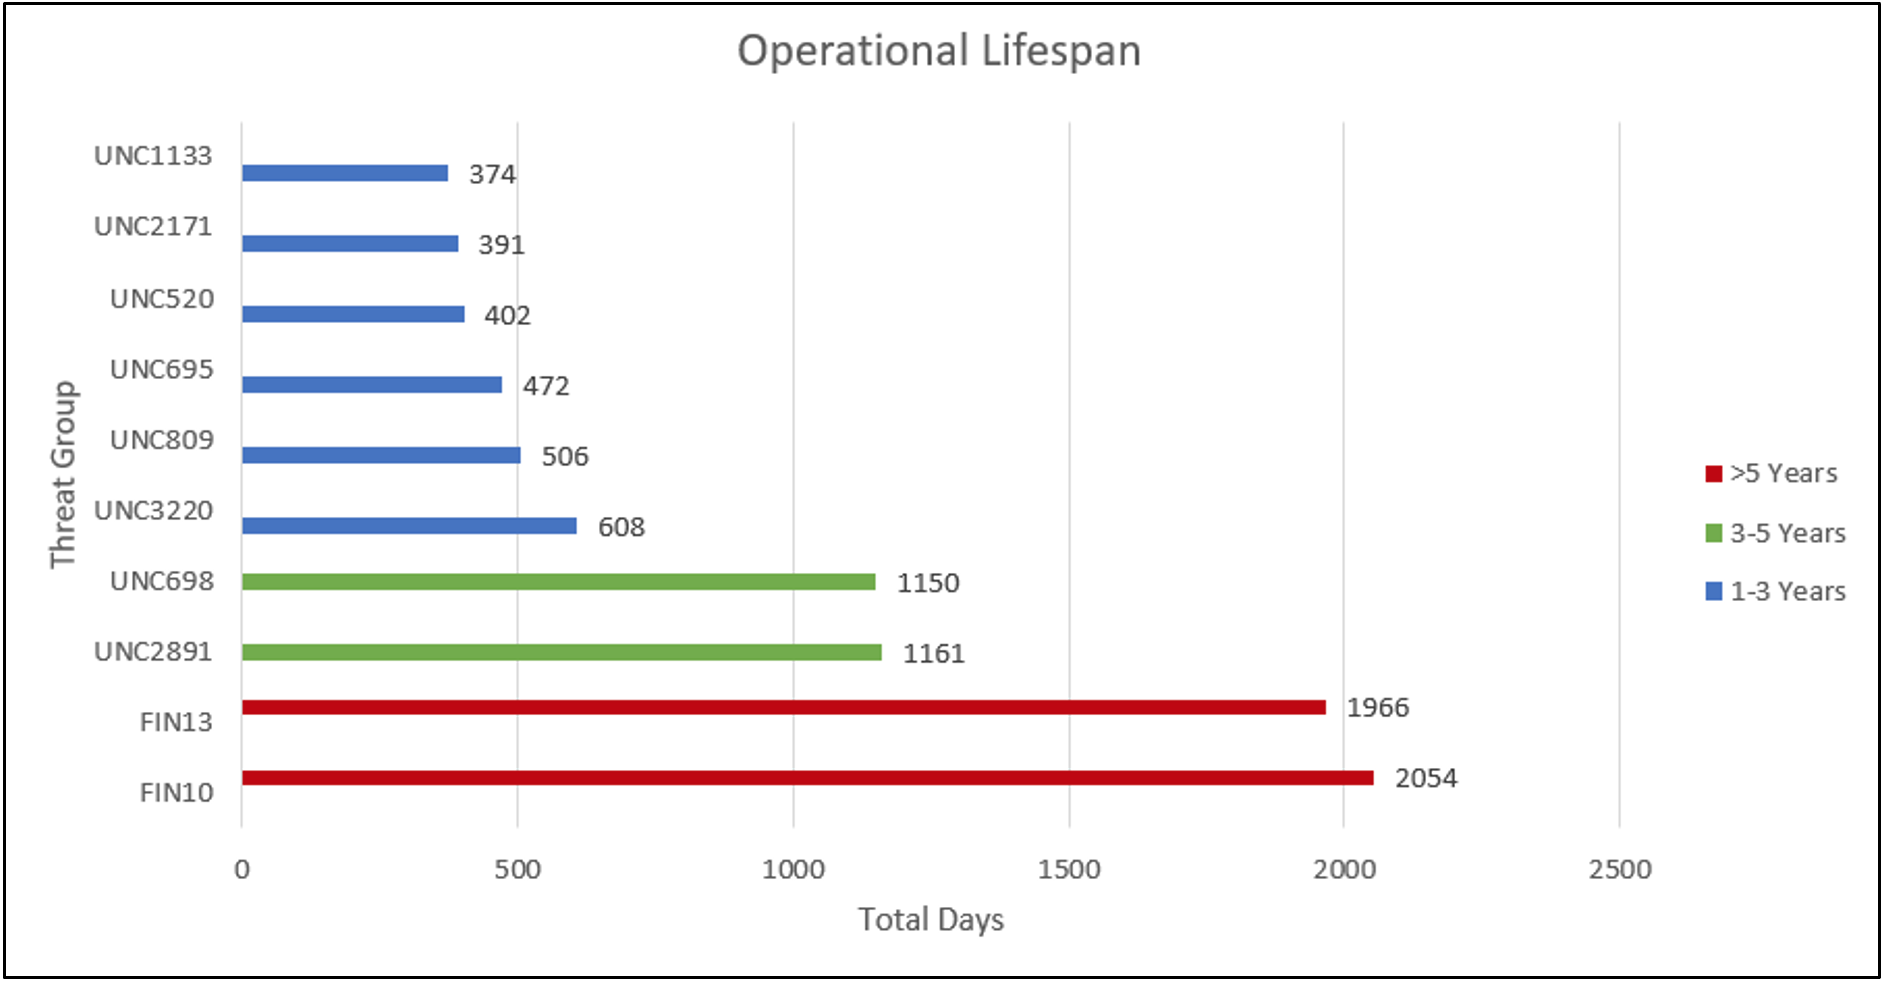 Financially Motivated Threat Groups with Operational Lifespans > 1 Year